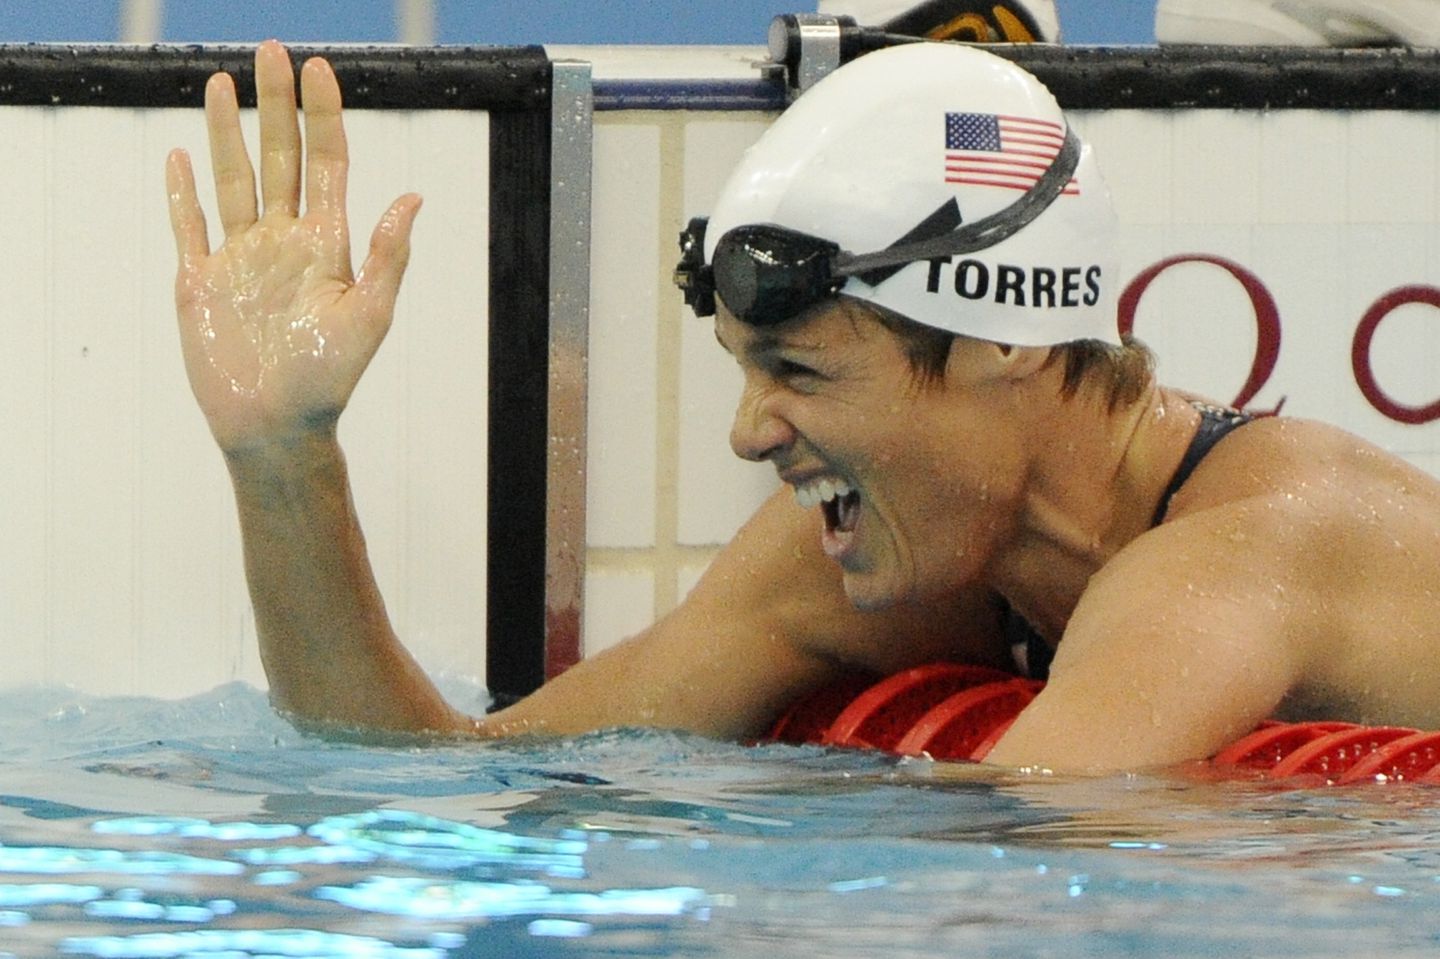 Dara Torres reacts after placing second in the women's 50-meter freestyle at the Beijing 2008 Olympics.